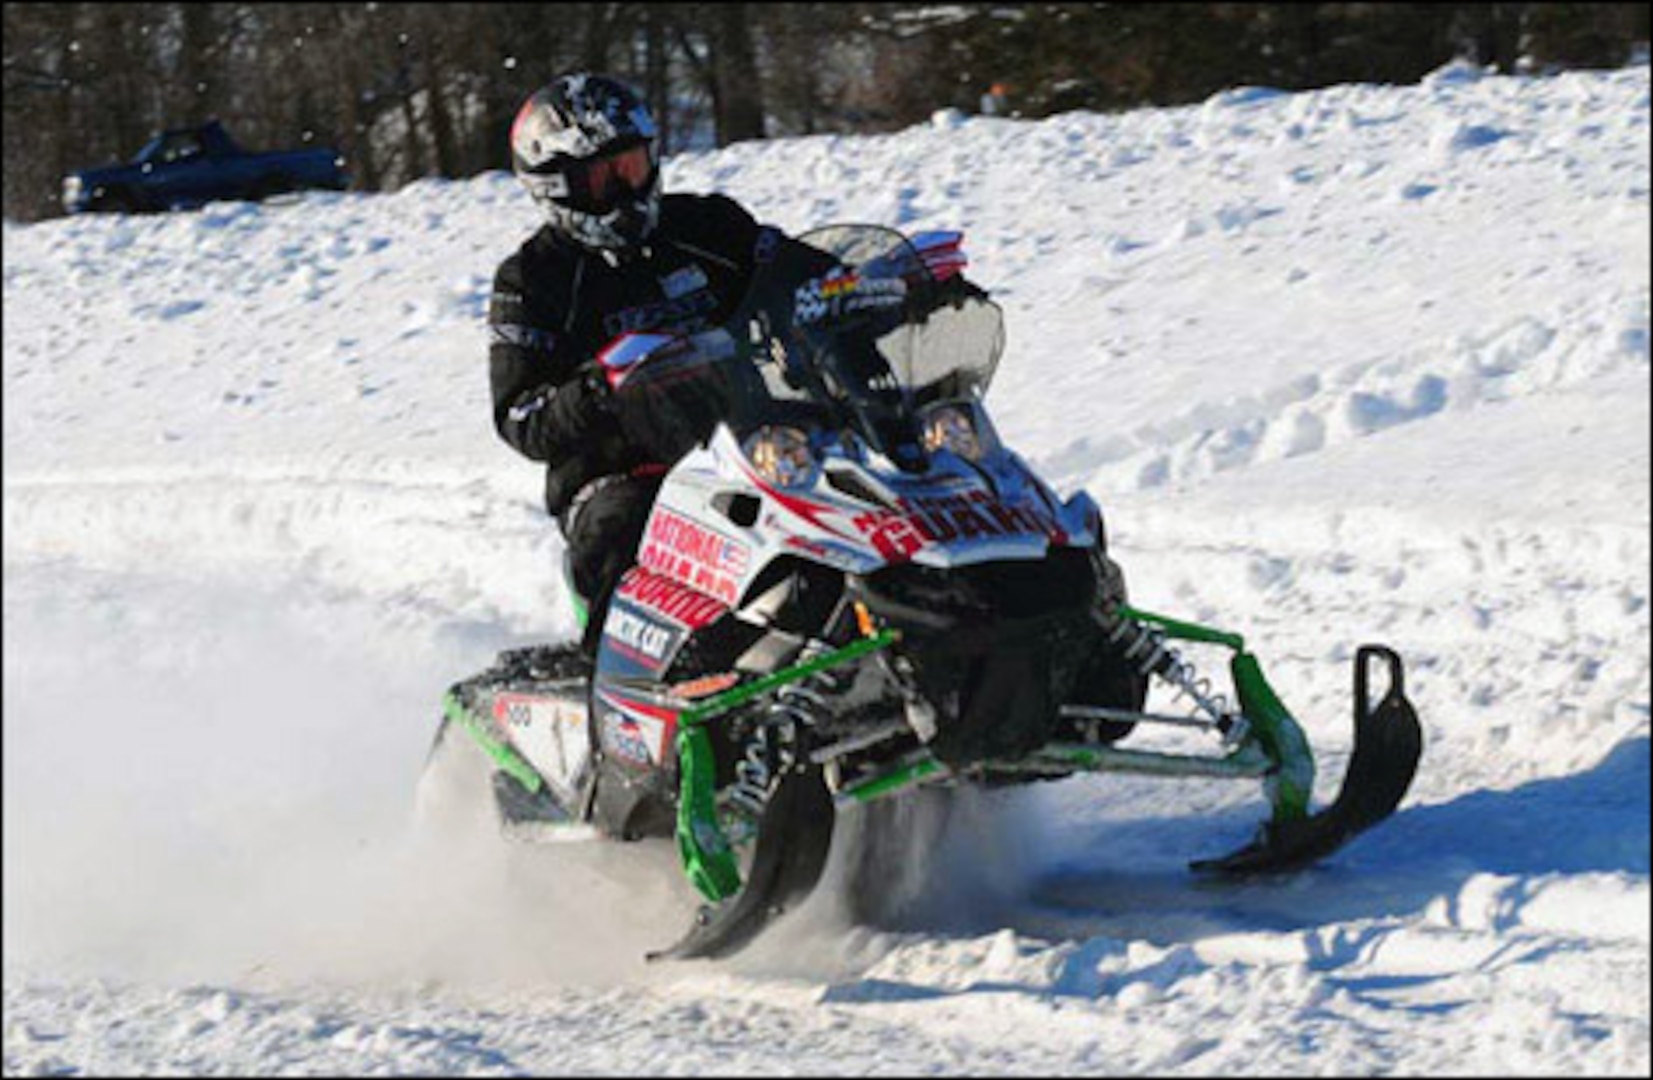 A National Guardsman competes in the USCC National Guard Cross-Country Snowmobile Championship. The team, which was comprised of one North Dakota Guardsmen and two from Minnesota, placed third in the event.